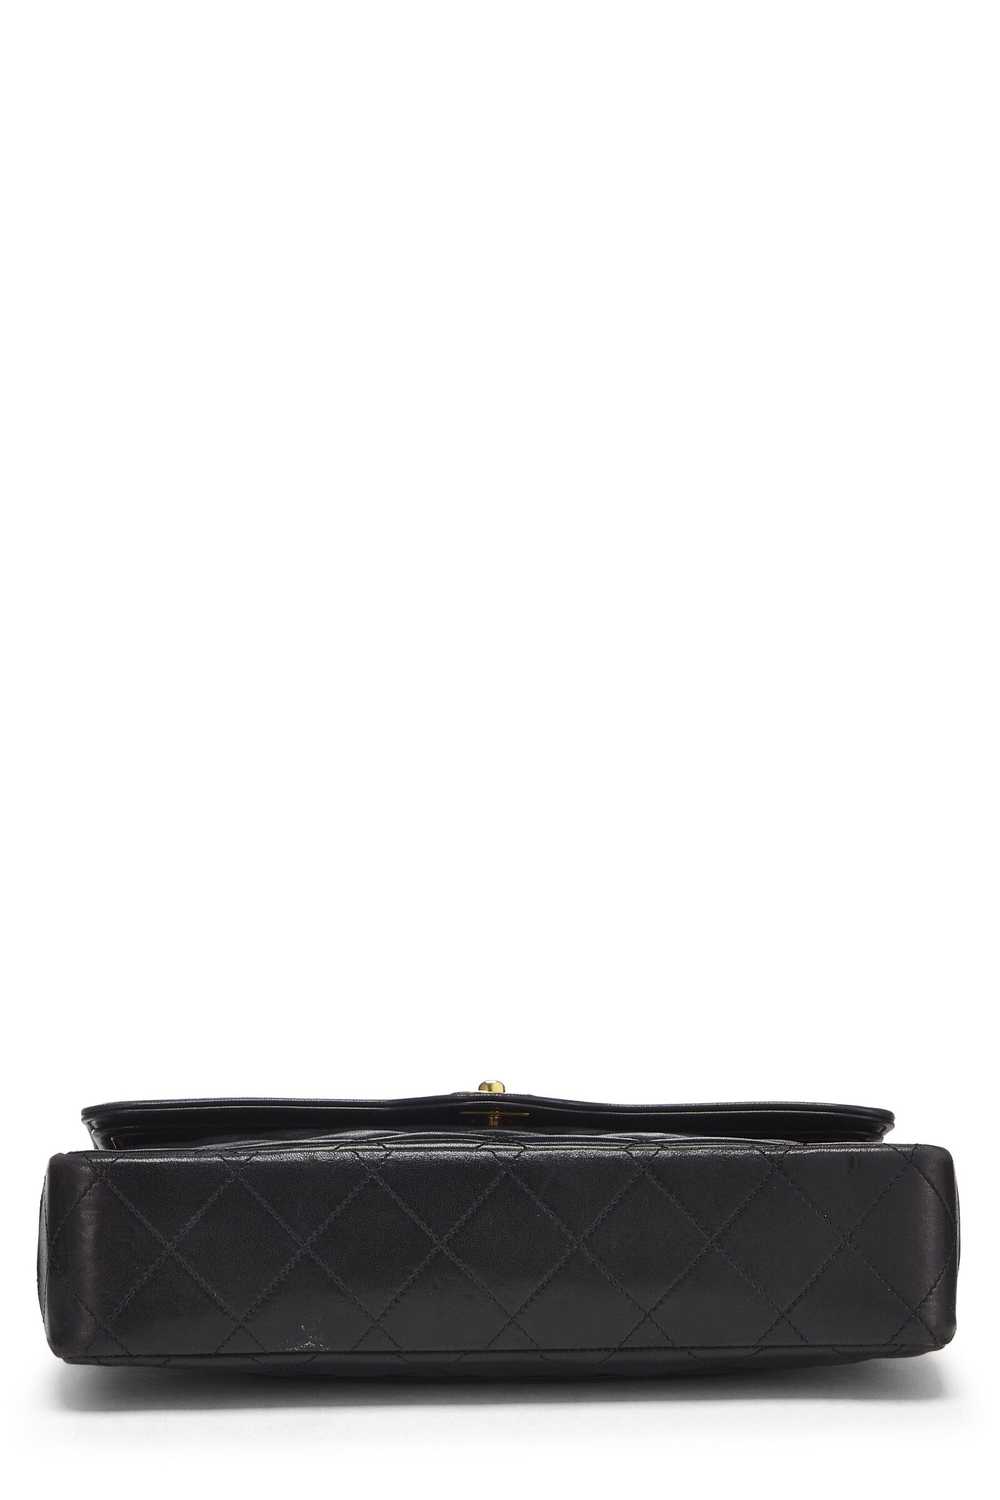 Black Quilted Lambskin Paris Limited Double Flap … - image 5